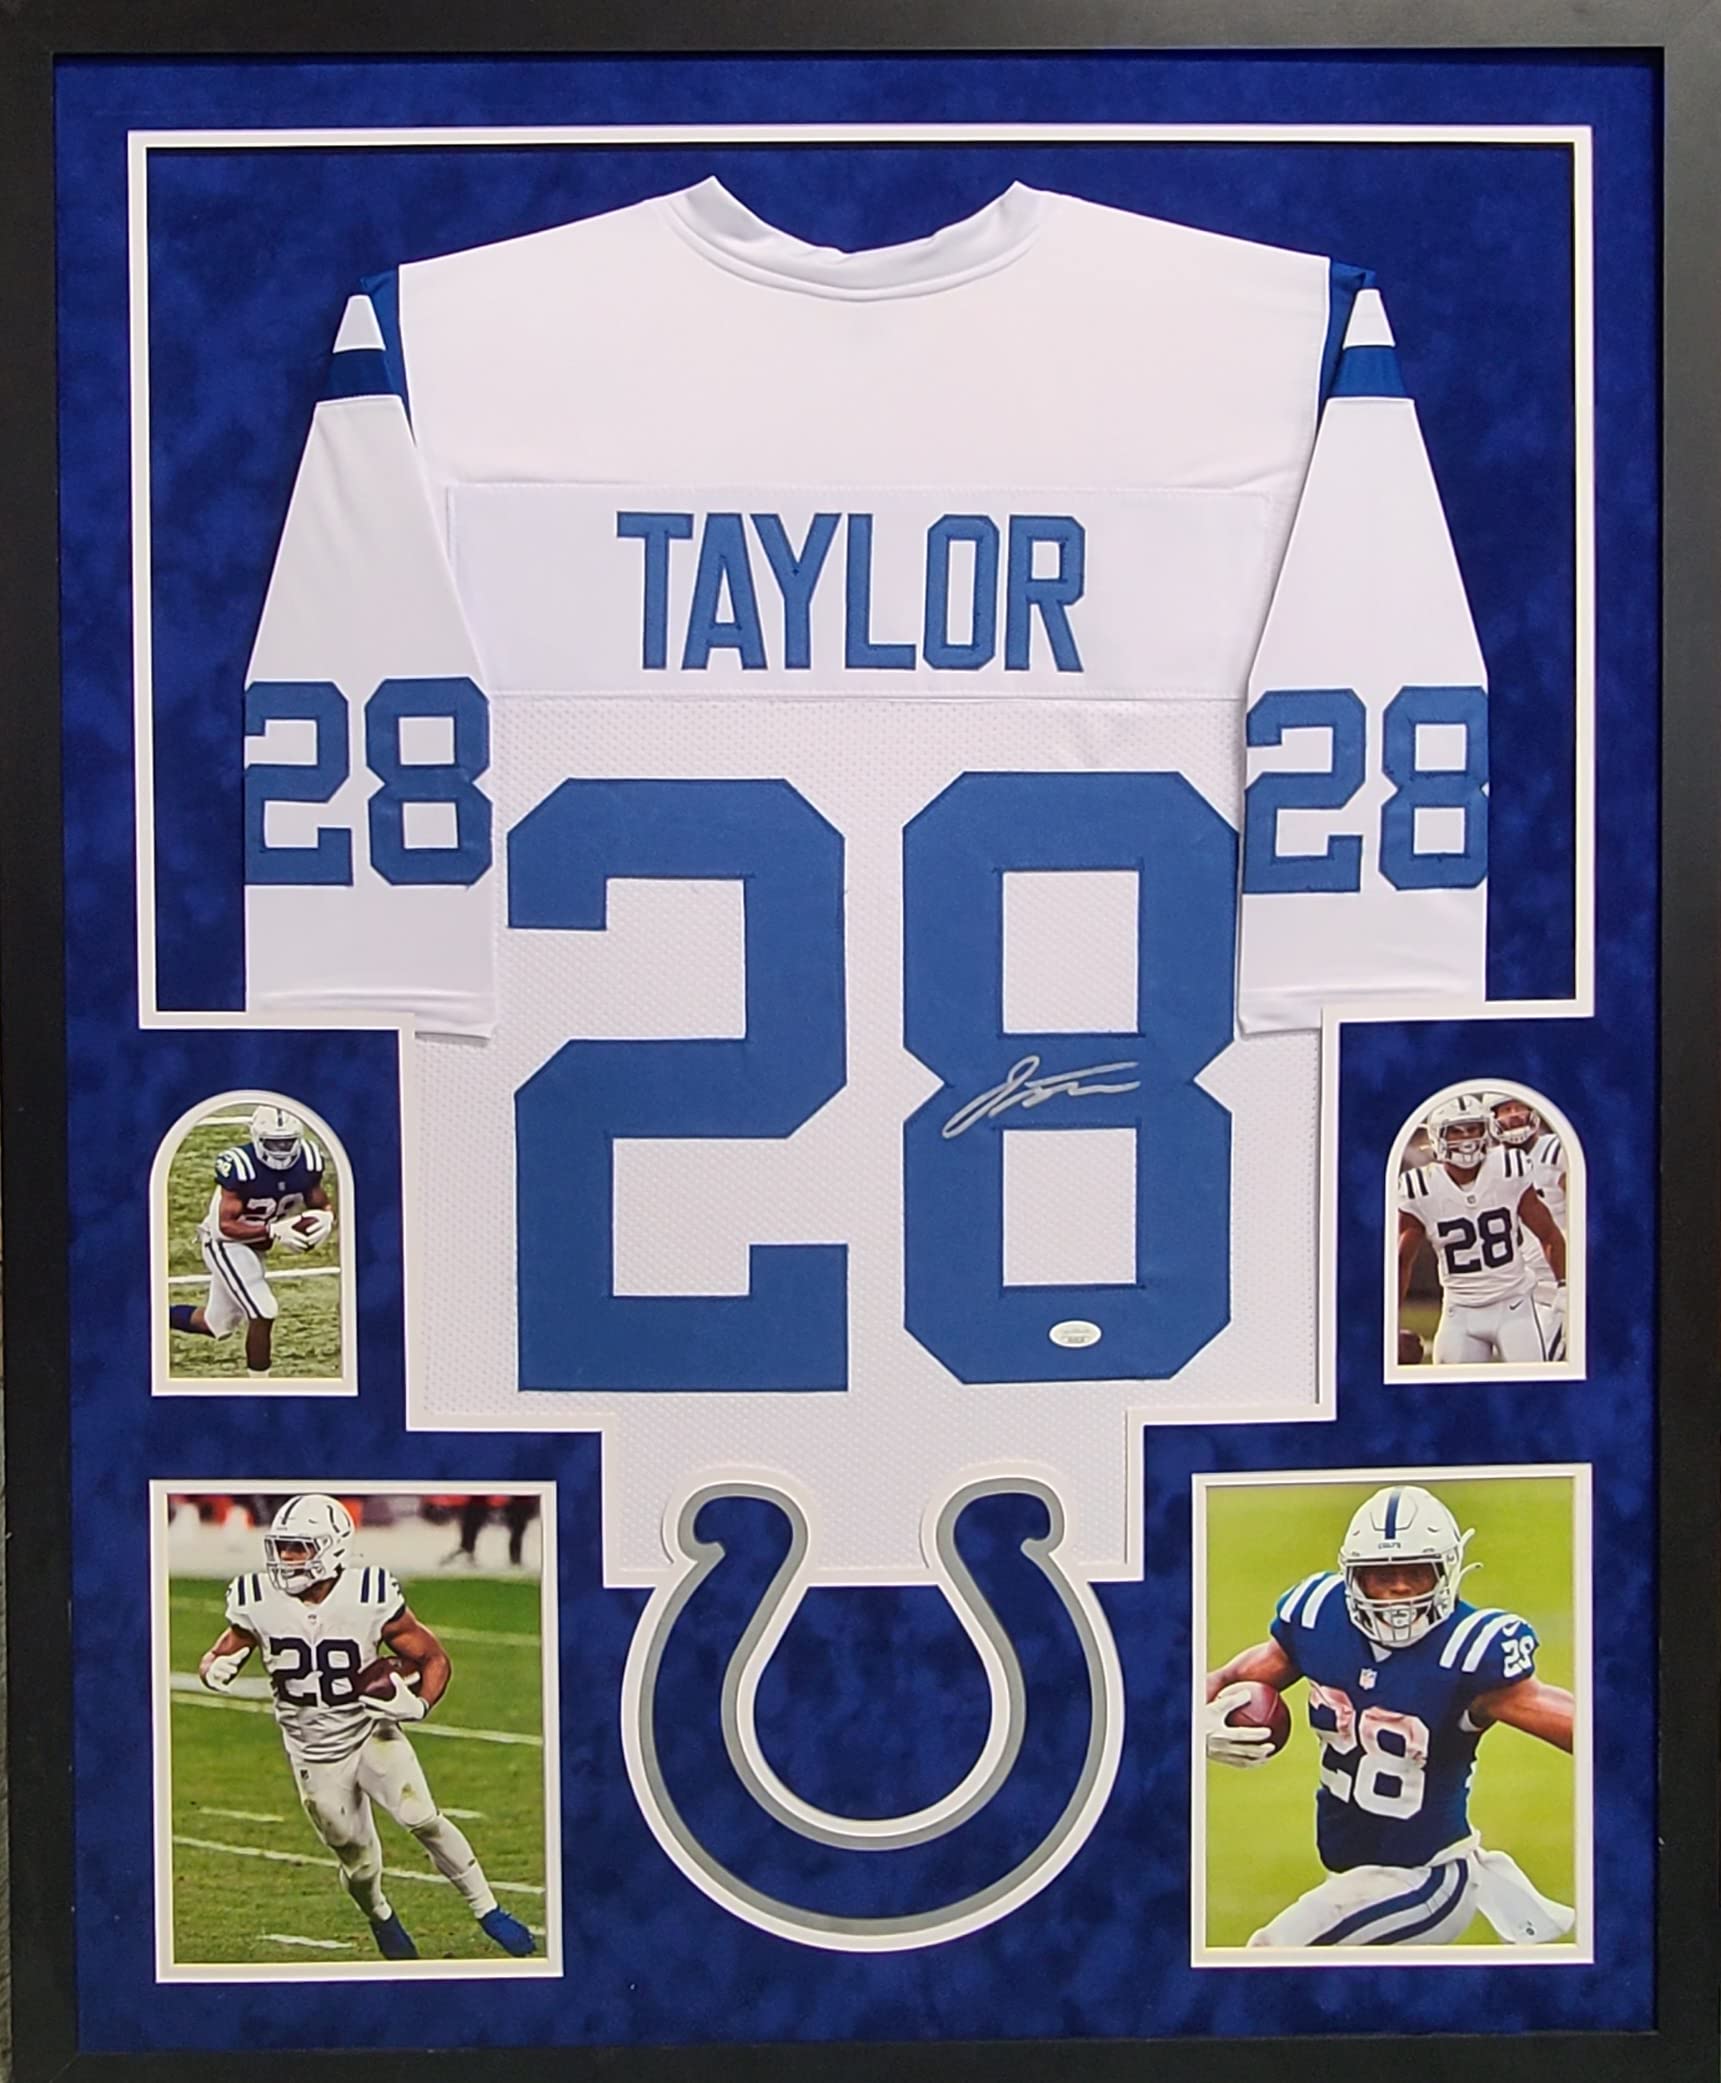 Jonathan Taylor Signed Autographed Custom Indianapolis Colts